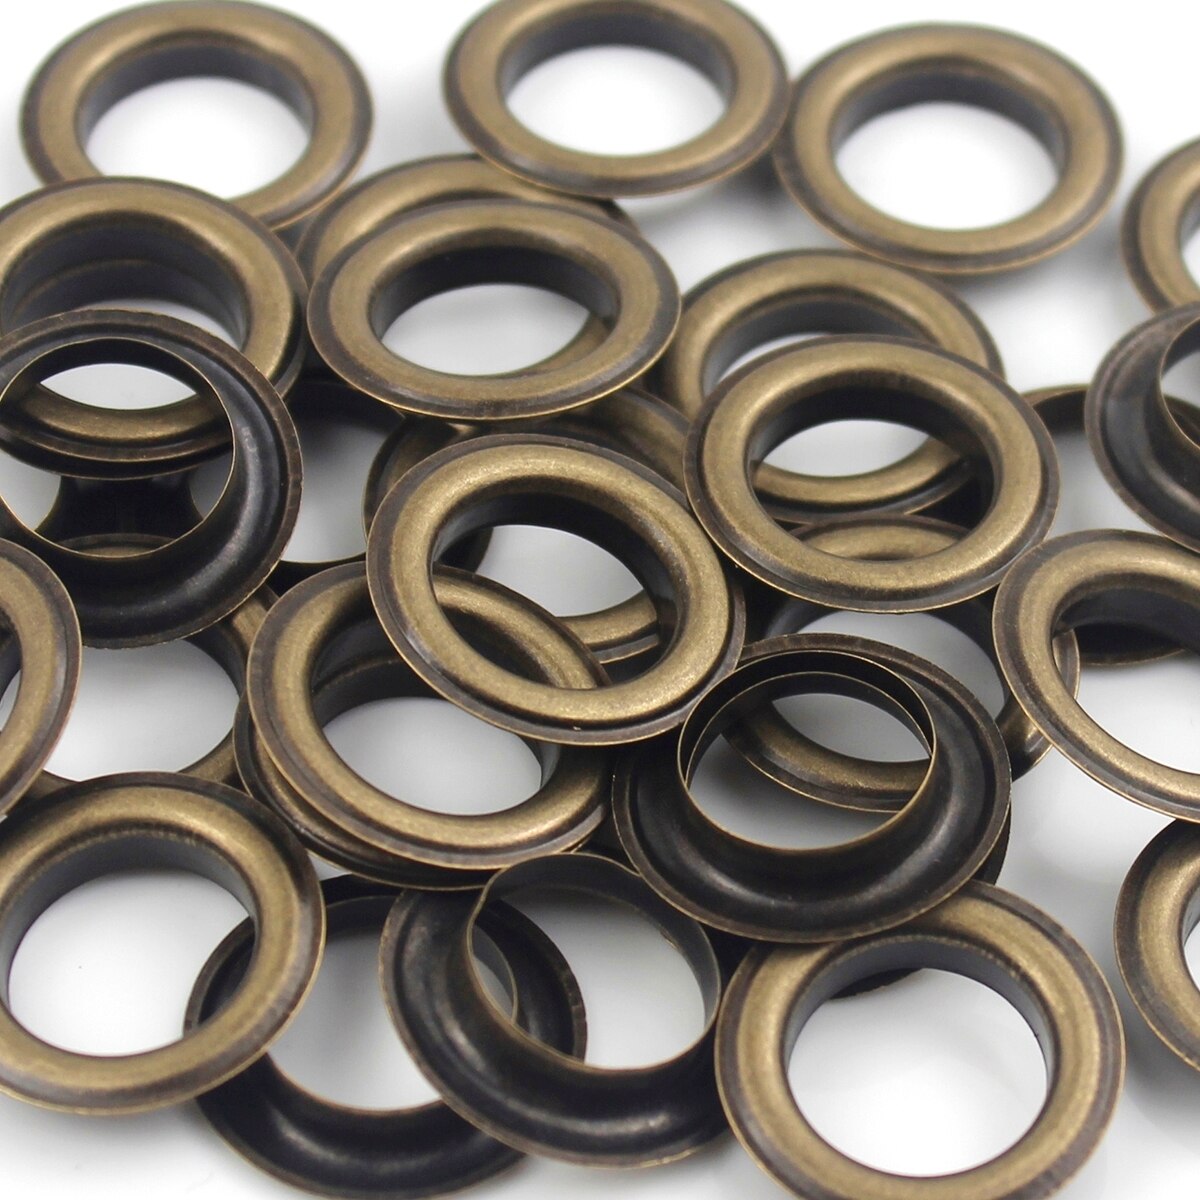 Number 34 Eyelets (250 pcs) [With or without Metal Washer] 28mm Eyelet